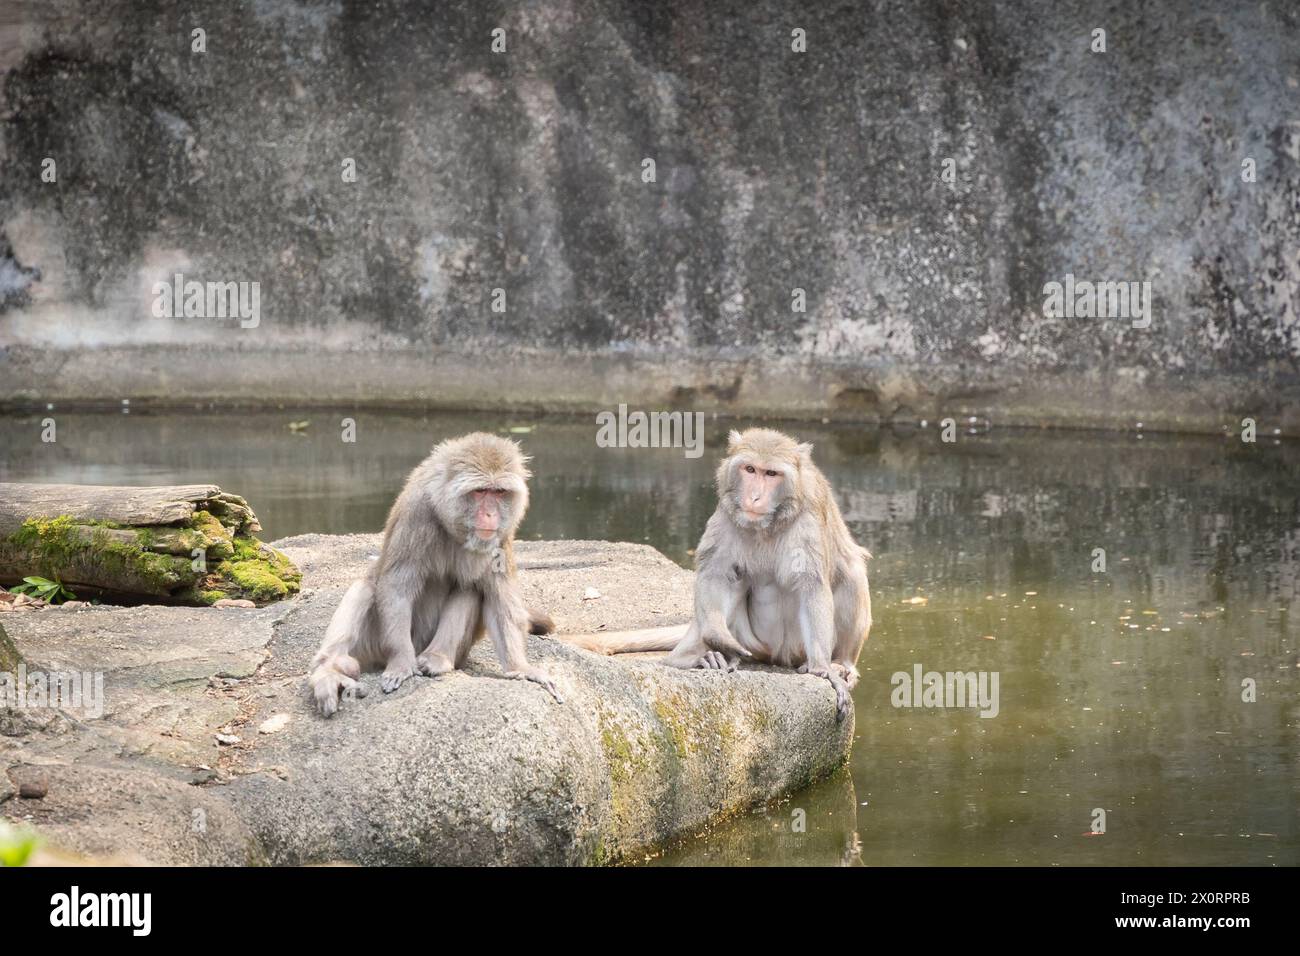 Two bored macaque apes sitting on the rock surrounded by water, Taipei, Taiwan. Stock Photo